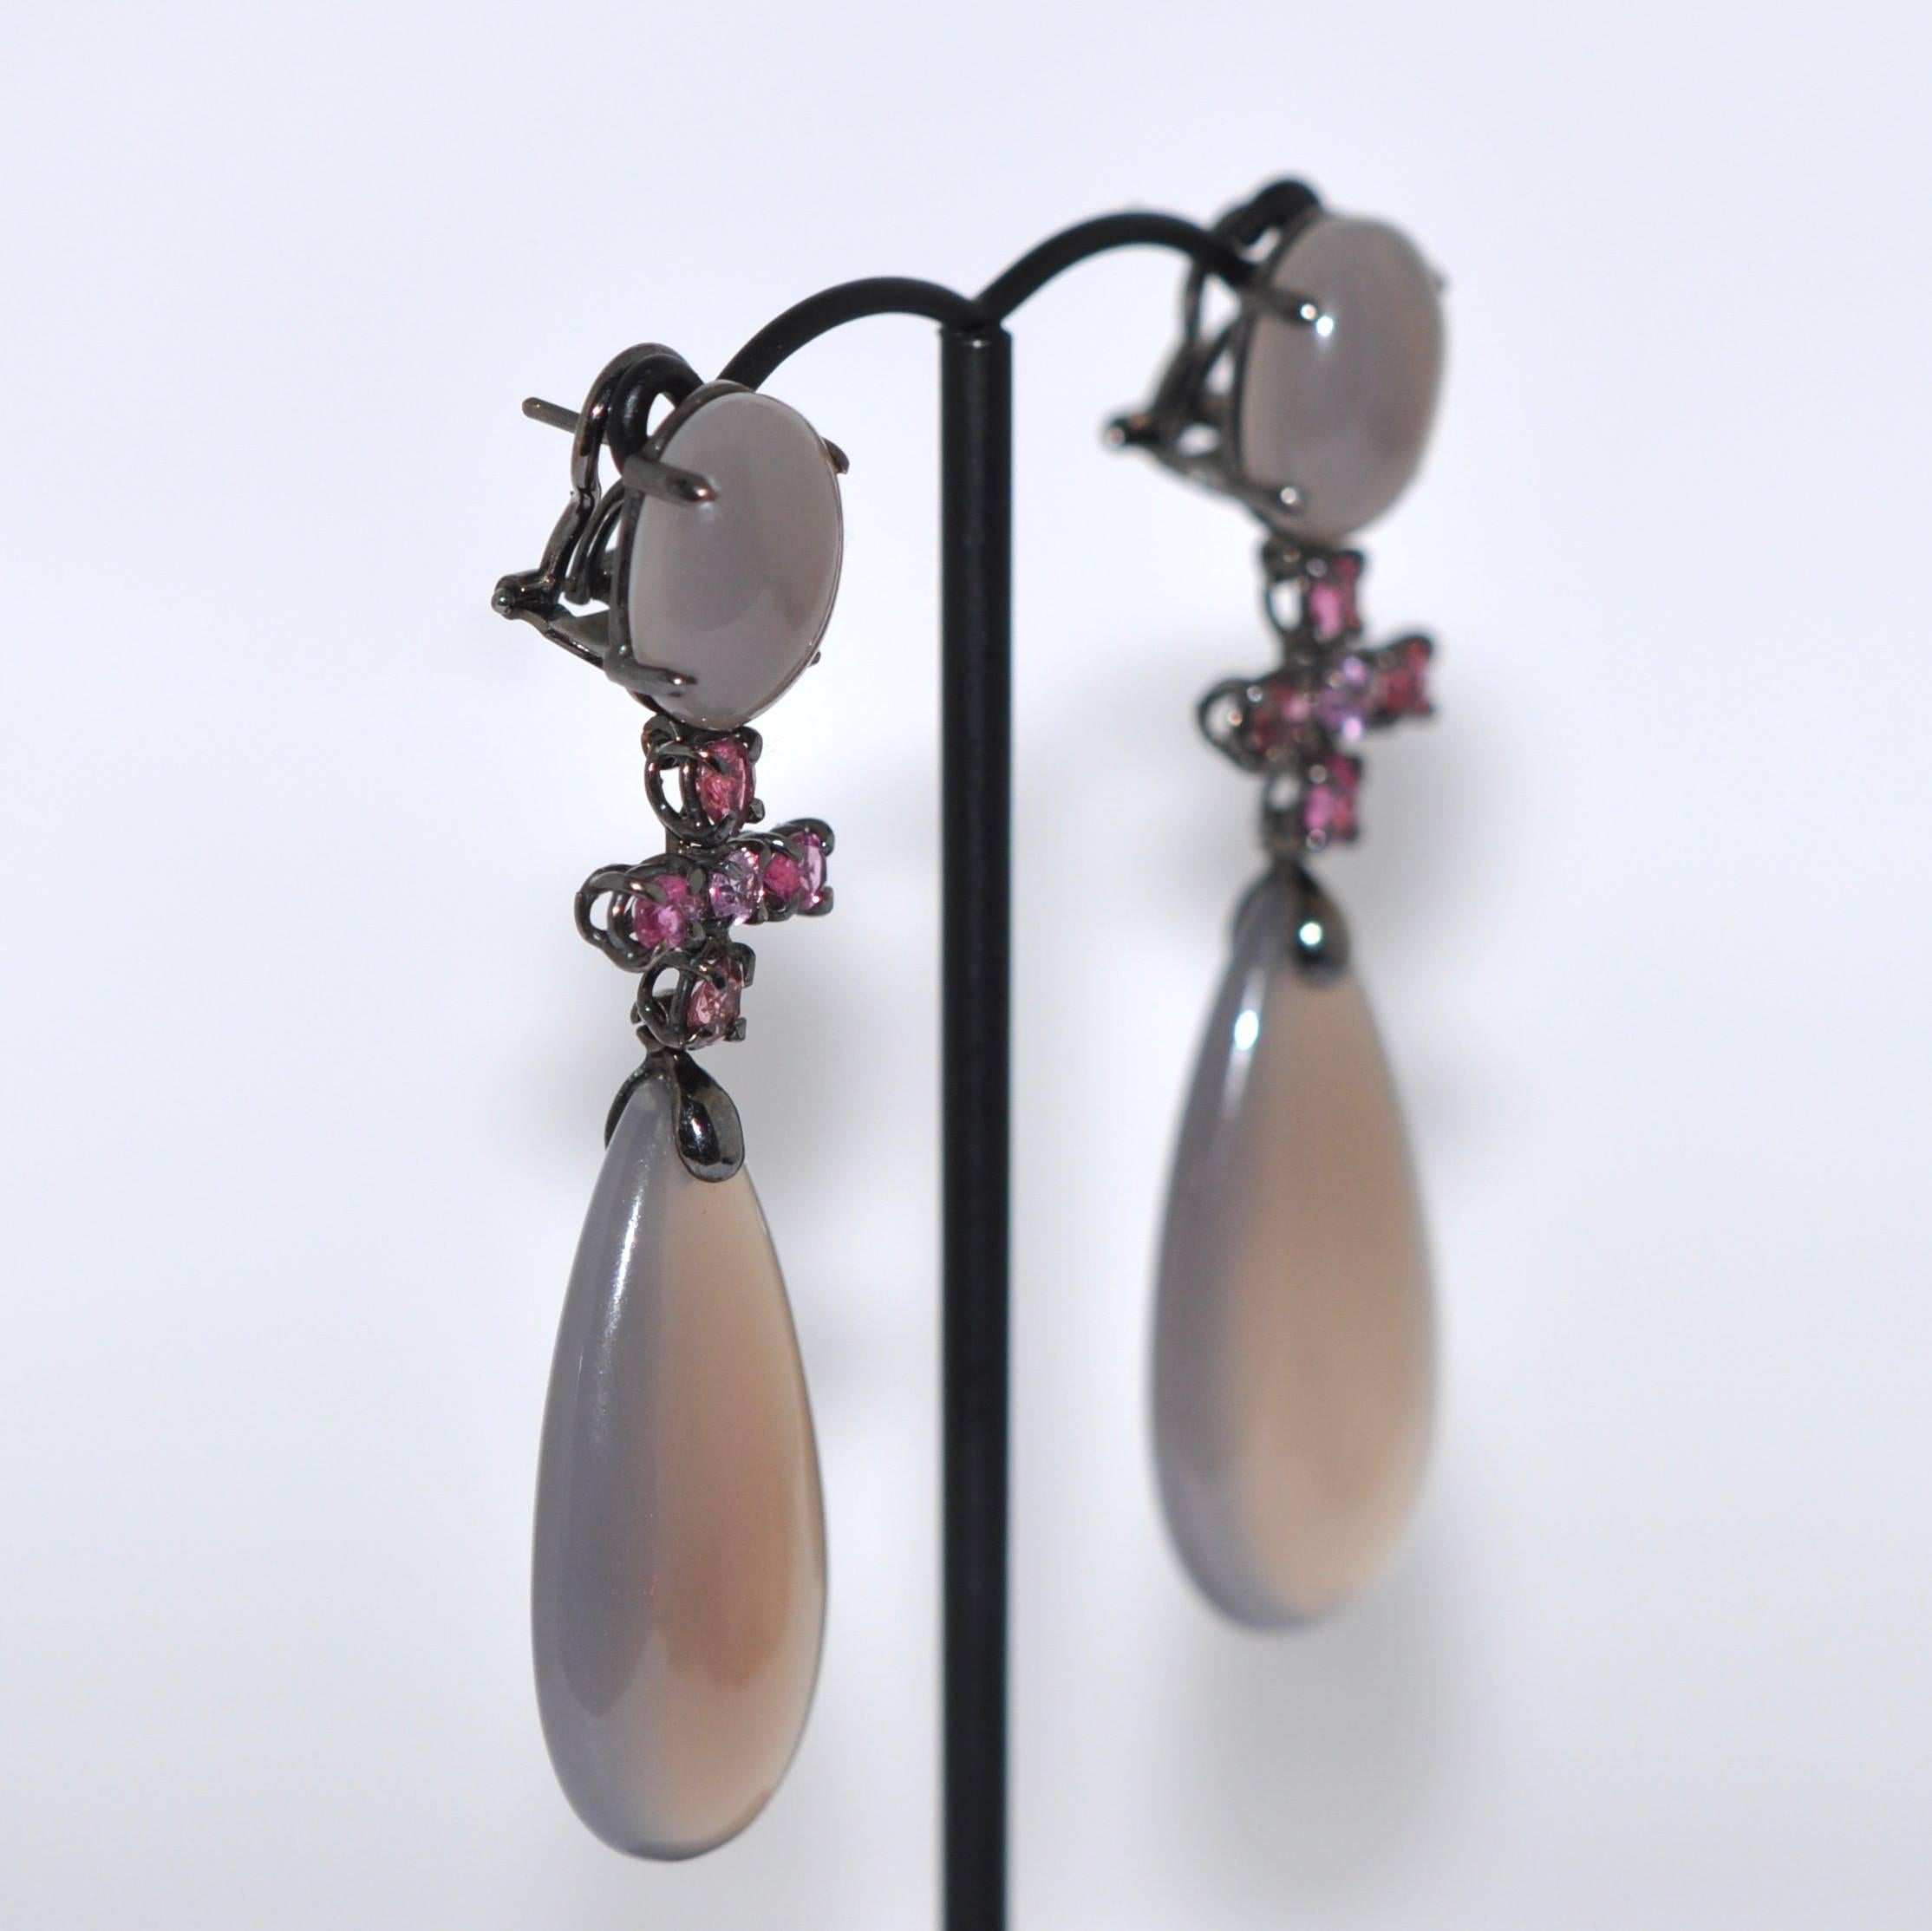 Discover this Grey Agate and Tourmaline, Black Gold Chandelier Earrings.
Grey Agate
Tourmaline
Black Gold 18 Carat